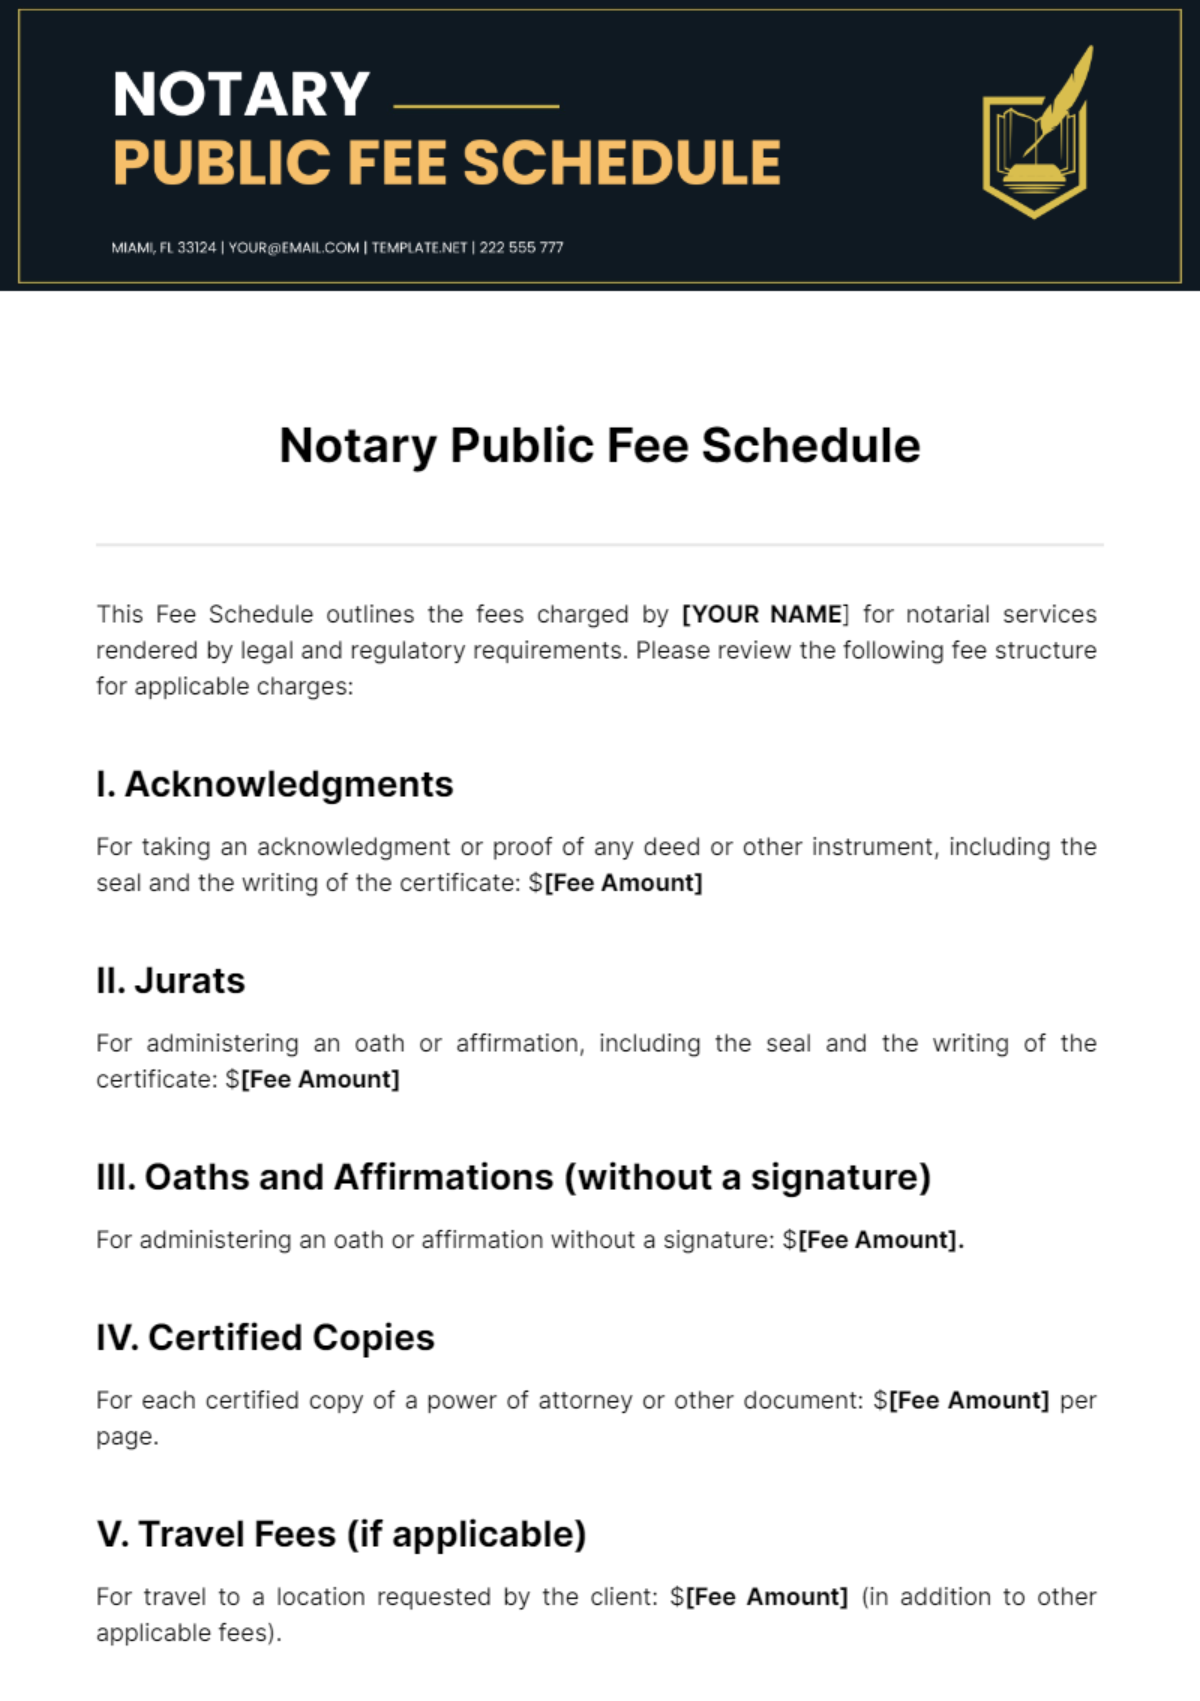 Notary Public Fee Schedule Template